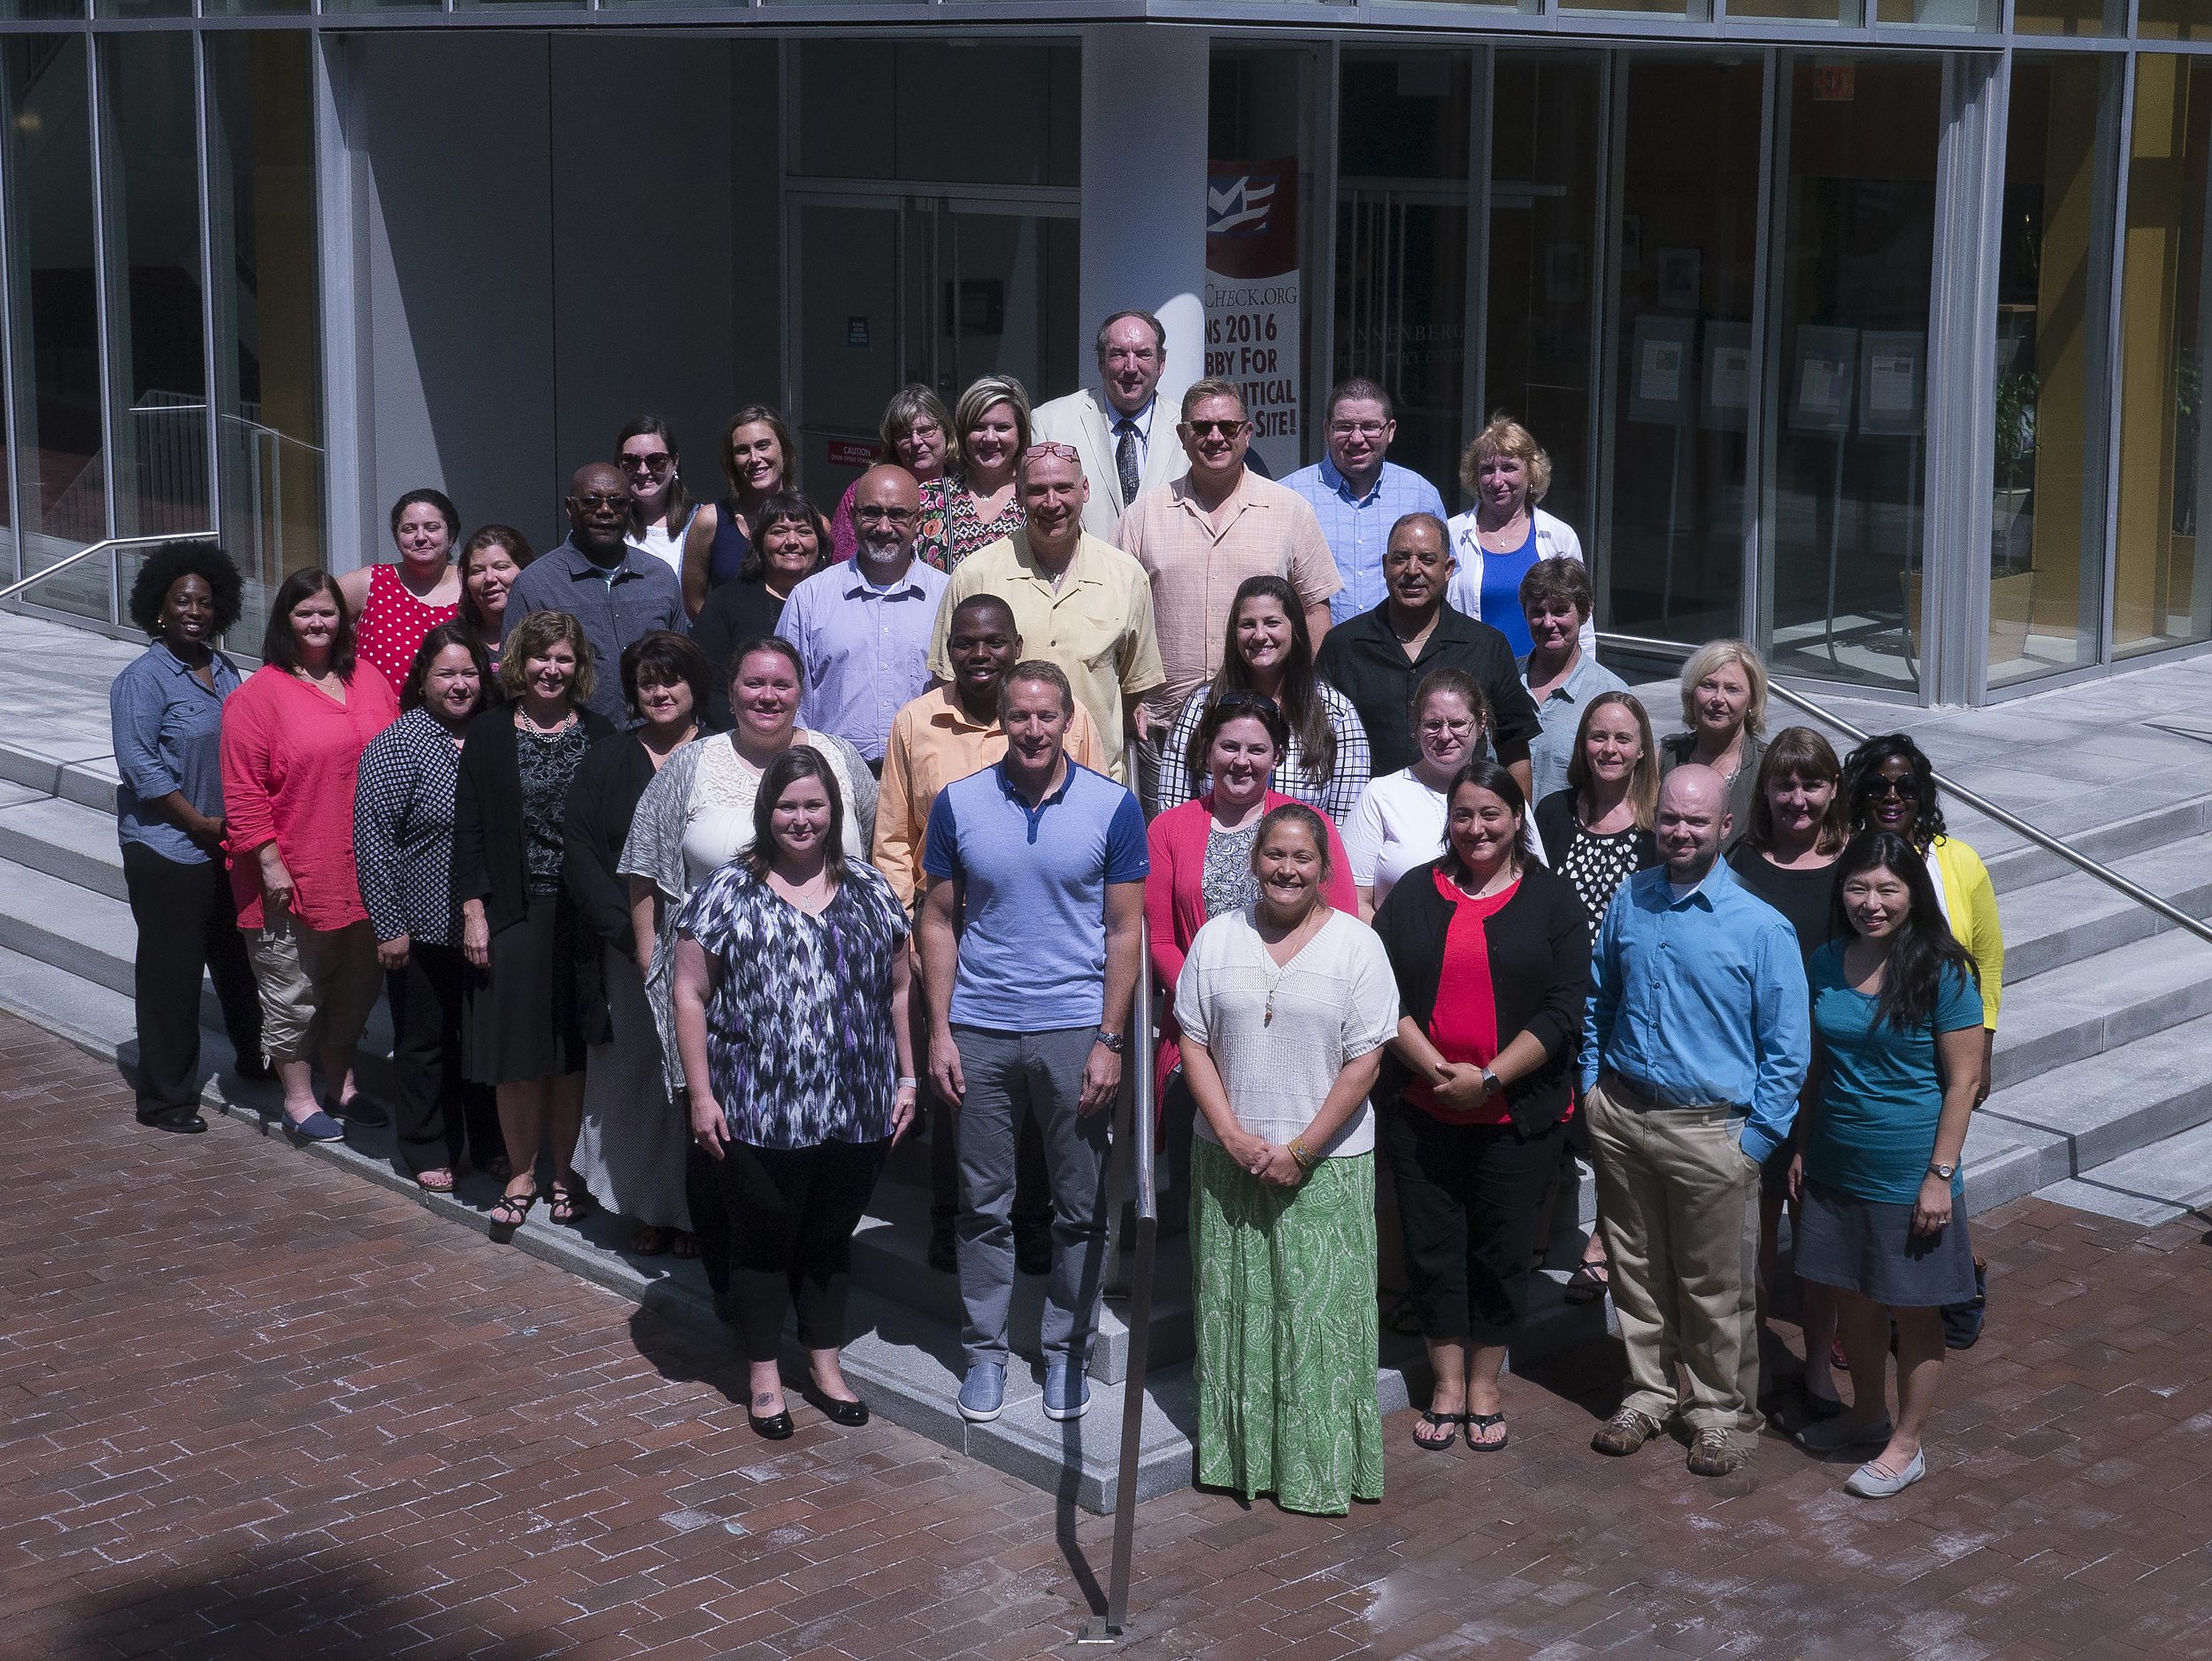 Constitutional Scholar Summer Institute Participants pose for group photo at Annenberg Center